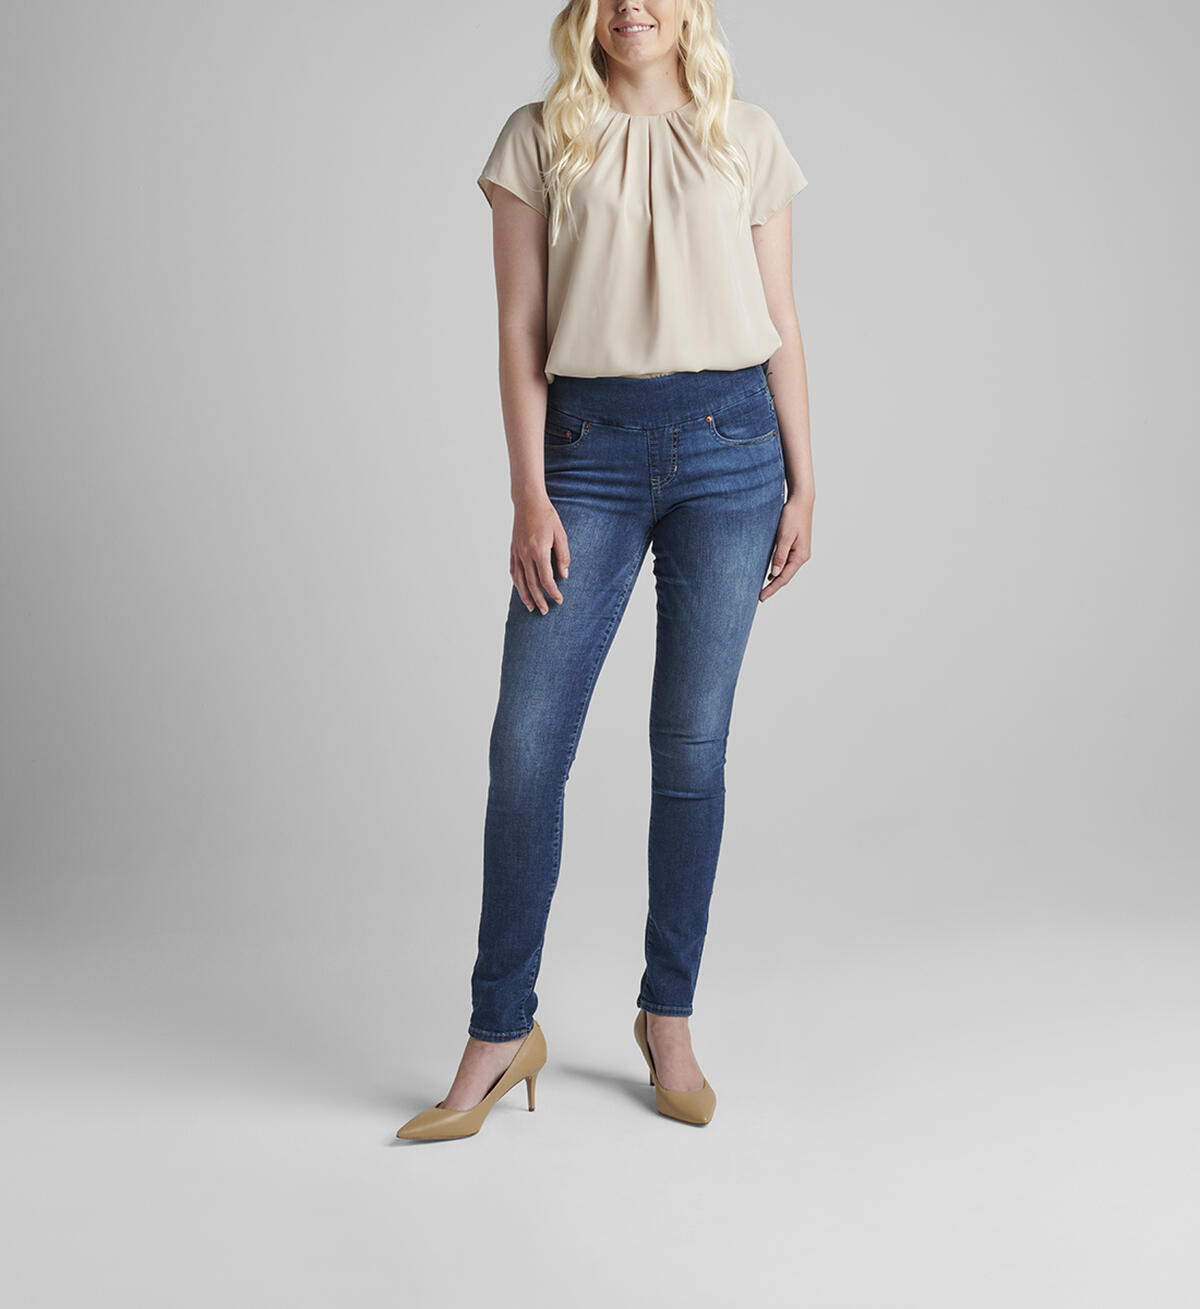 Nora Mid Rise Skinny Pull-On Jeans Petite, , hi-res image number 0